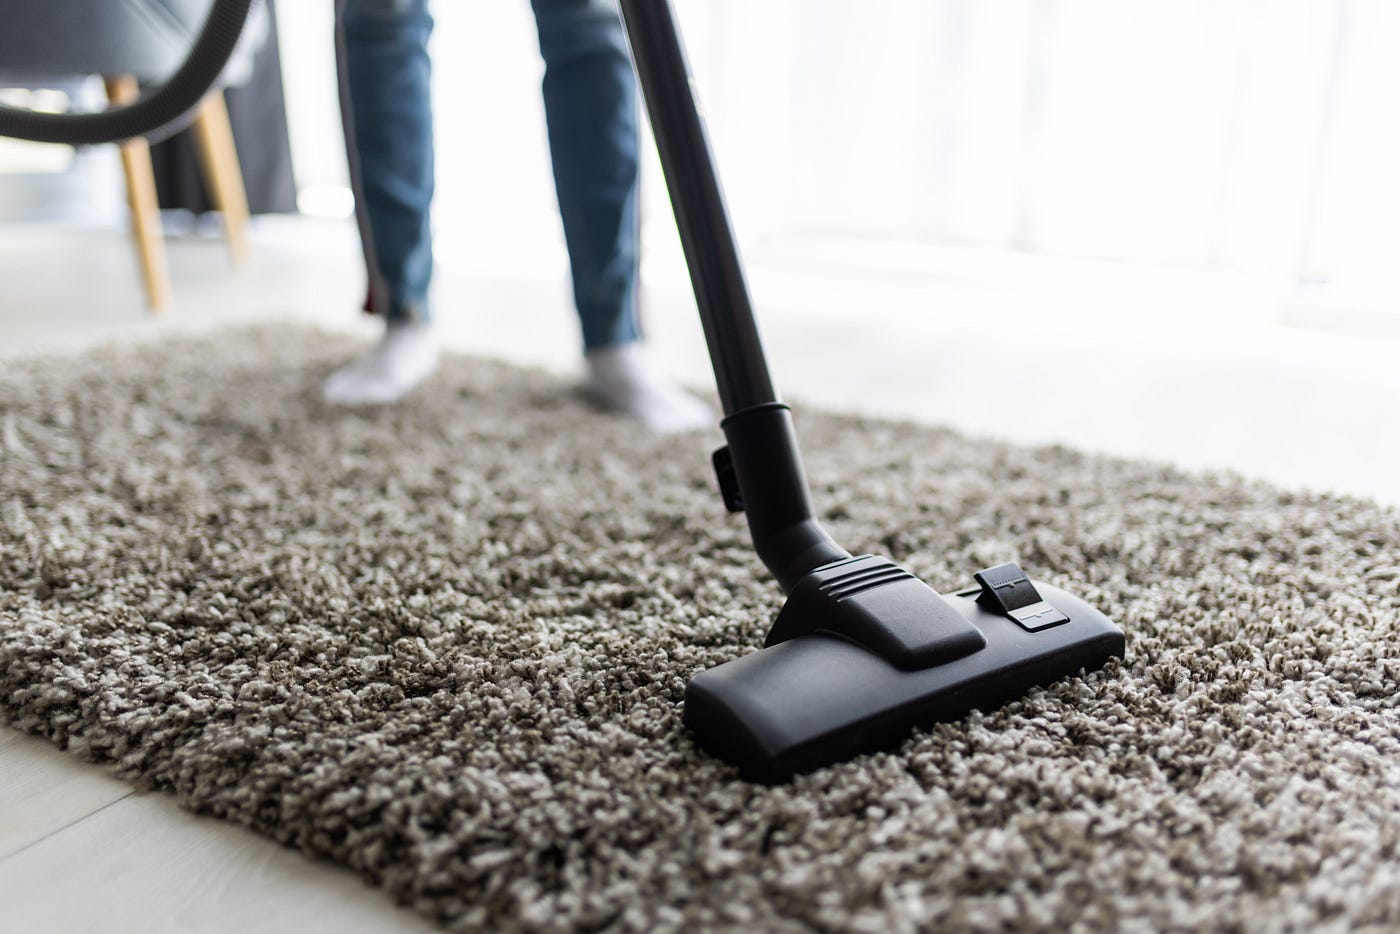 Carpet Cleaning 101: The Ultimate Guide to Reviving Your Floors and Creating a Healthier Home | by Rahman Sahabur | Medium